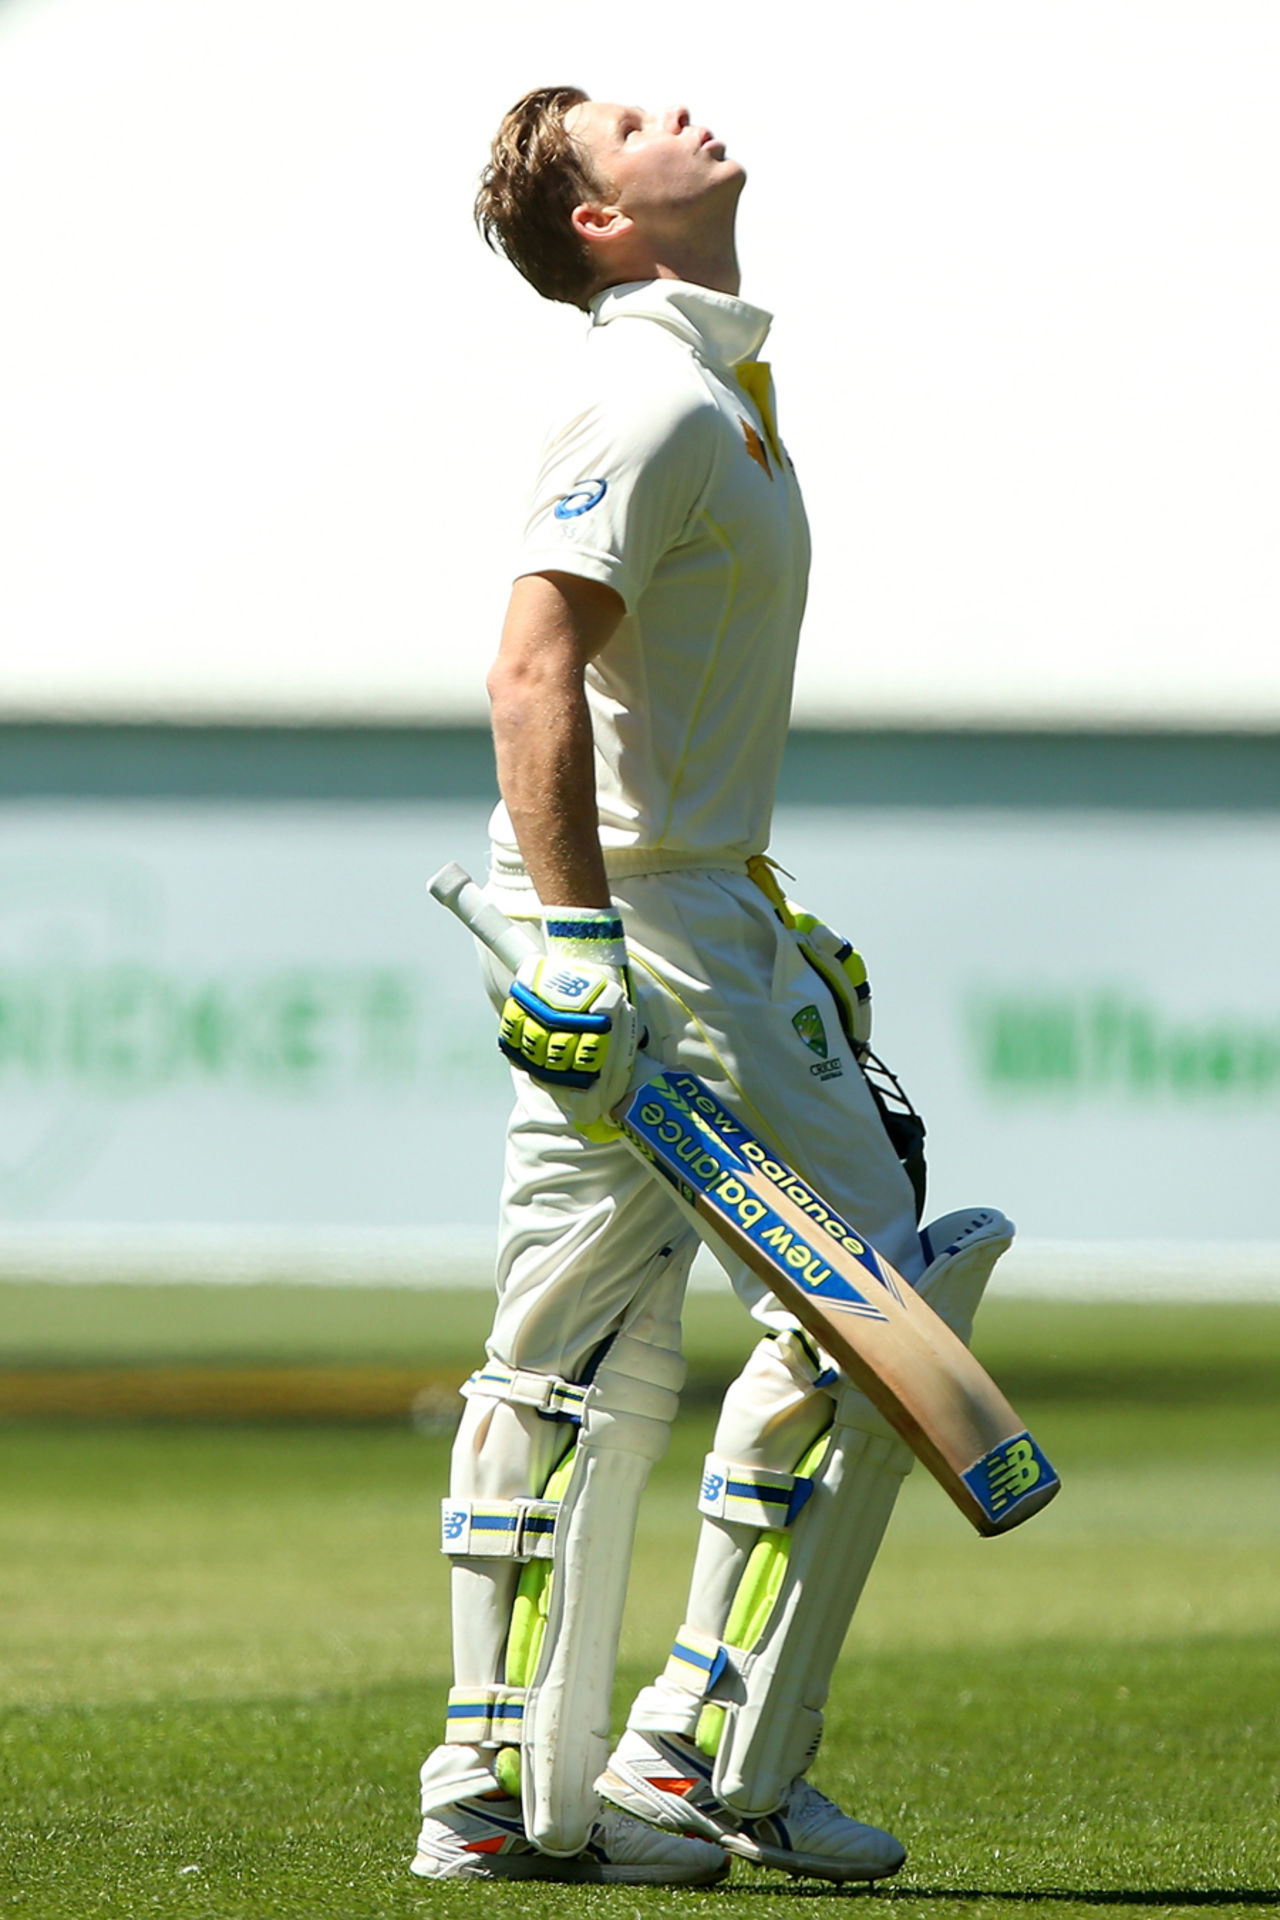 Steven Smith scored his third century of the series, Australia v India, 3rd Test, Melbourne, 2nd day, December 27, 2014